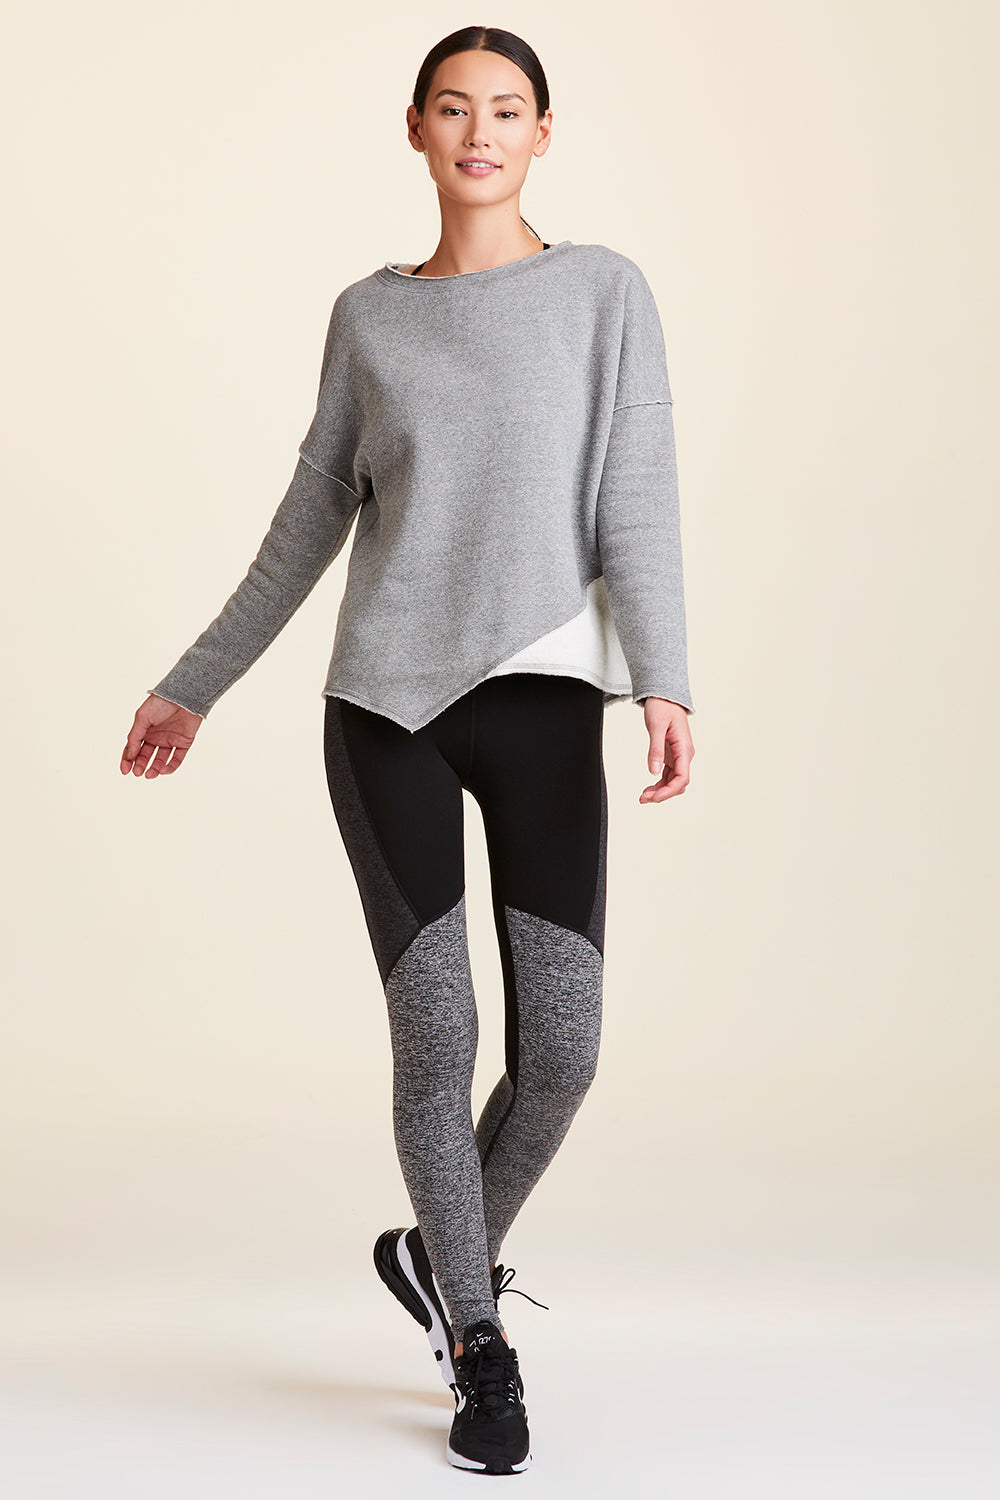 Front view of Alala Women's Luxury Athleisure grey sweatshirt with distressed details on seams